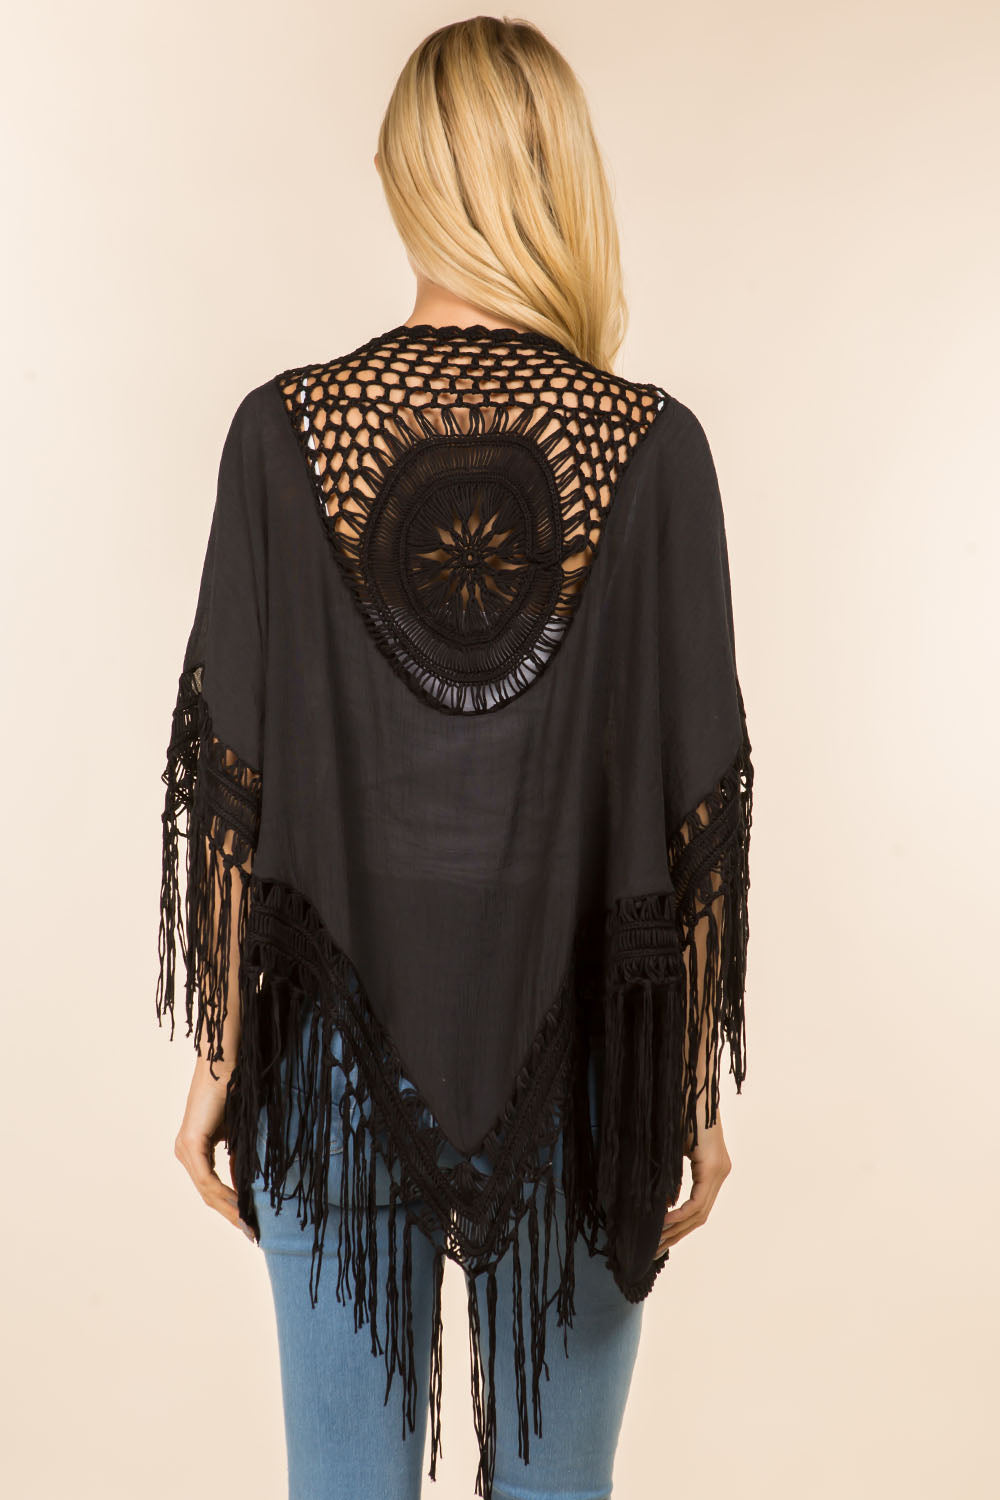 KP-4142 solid color kimono with crochet detail back design